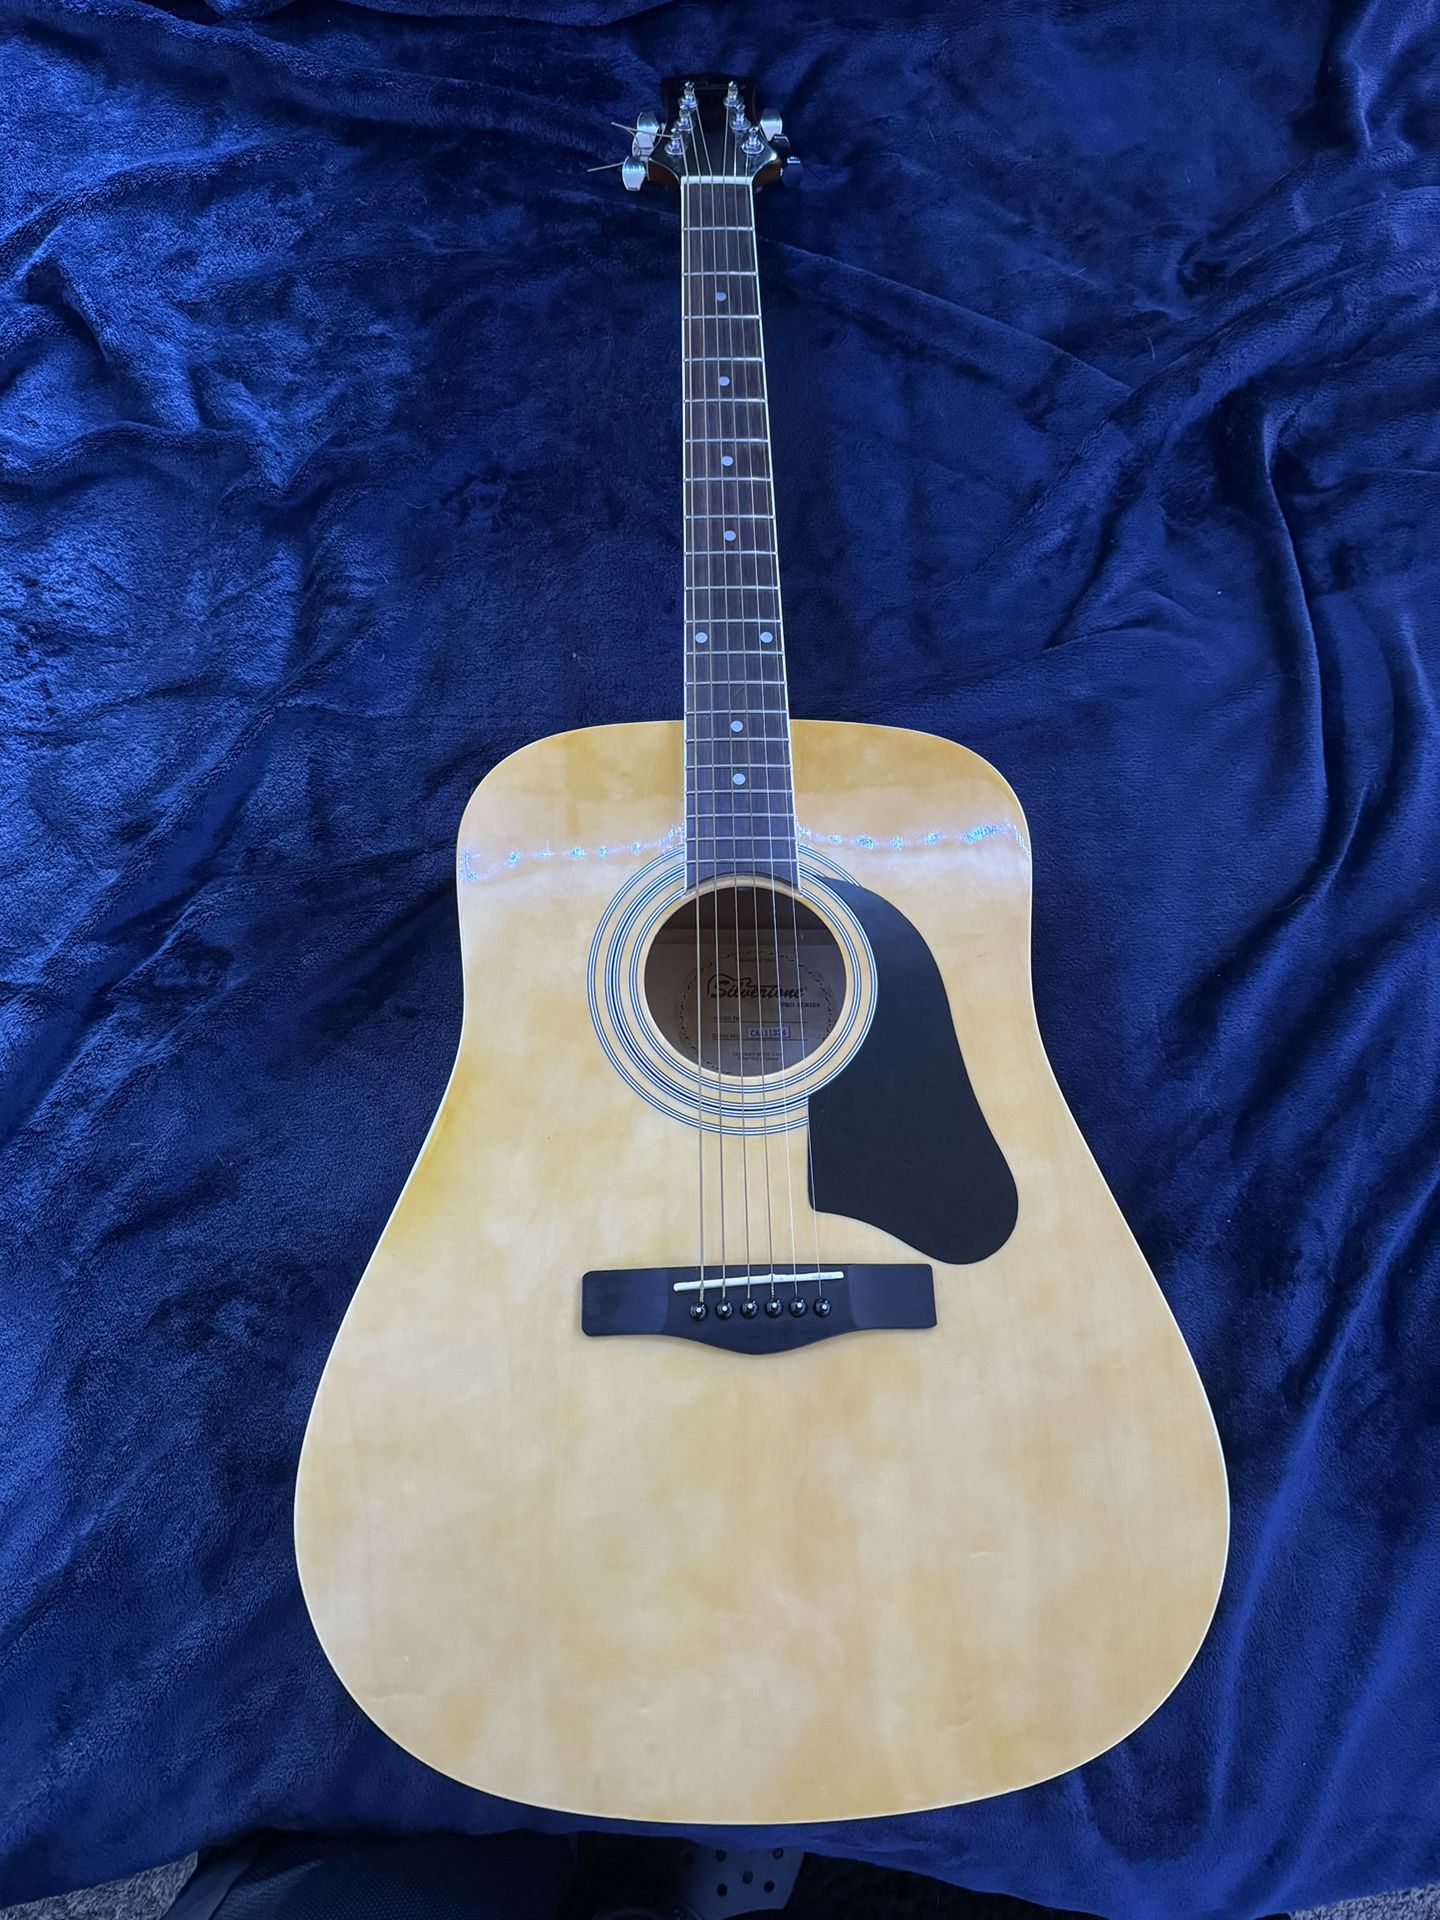 Silverstone acoustic guitar